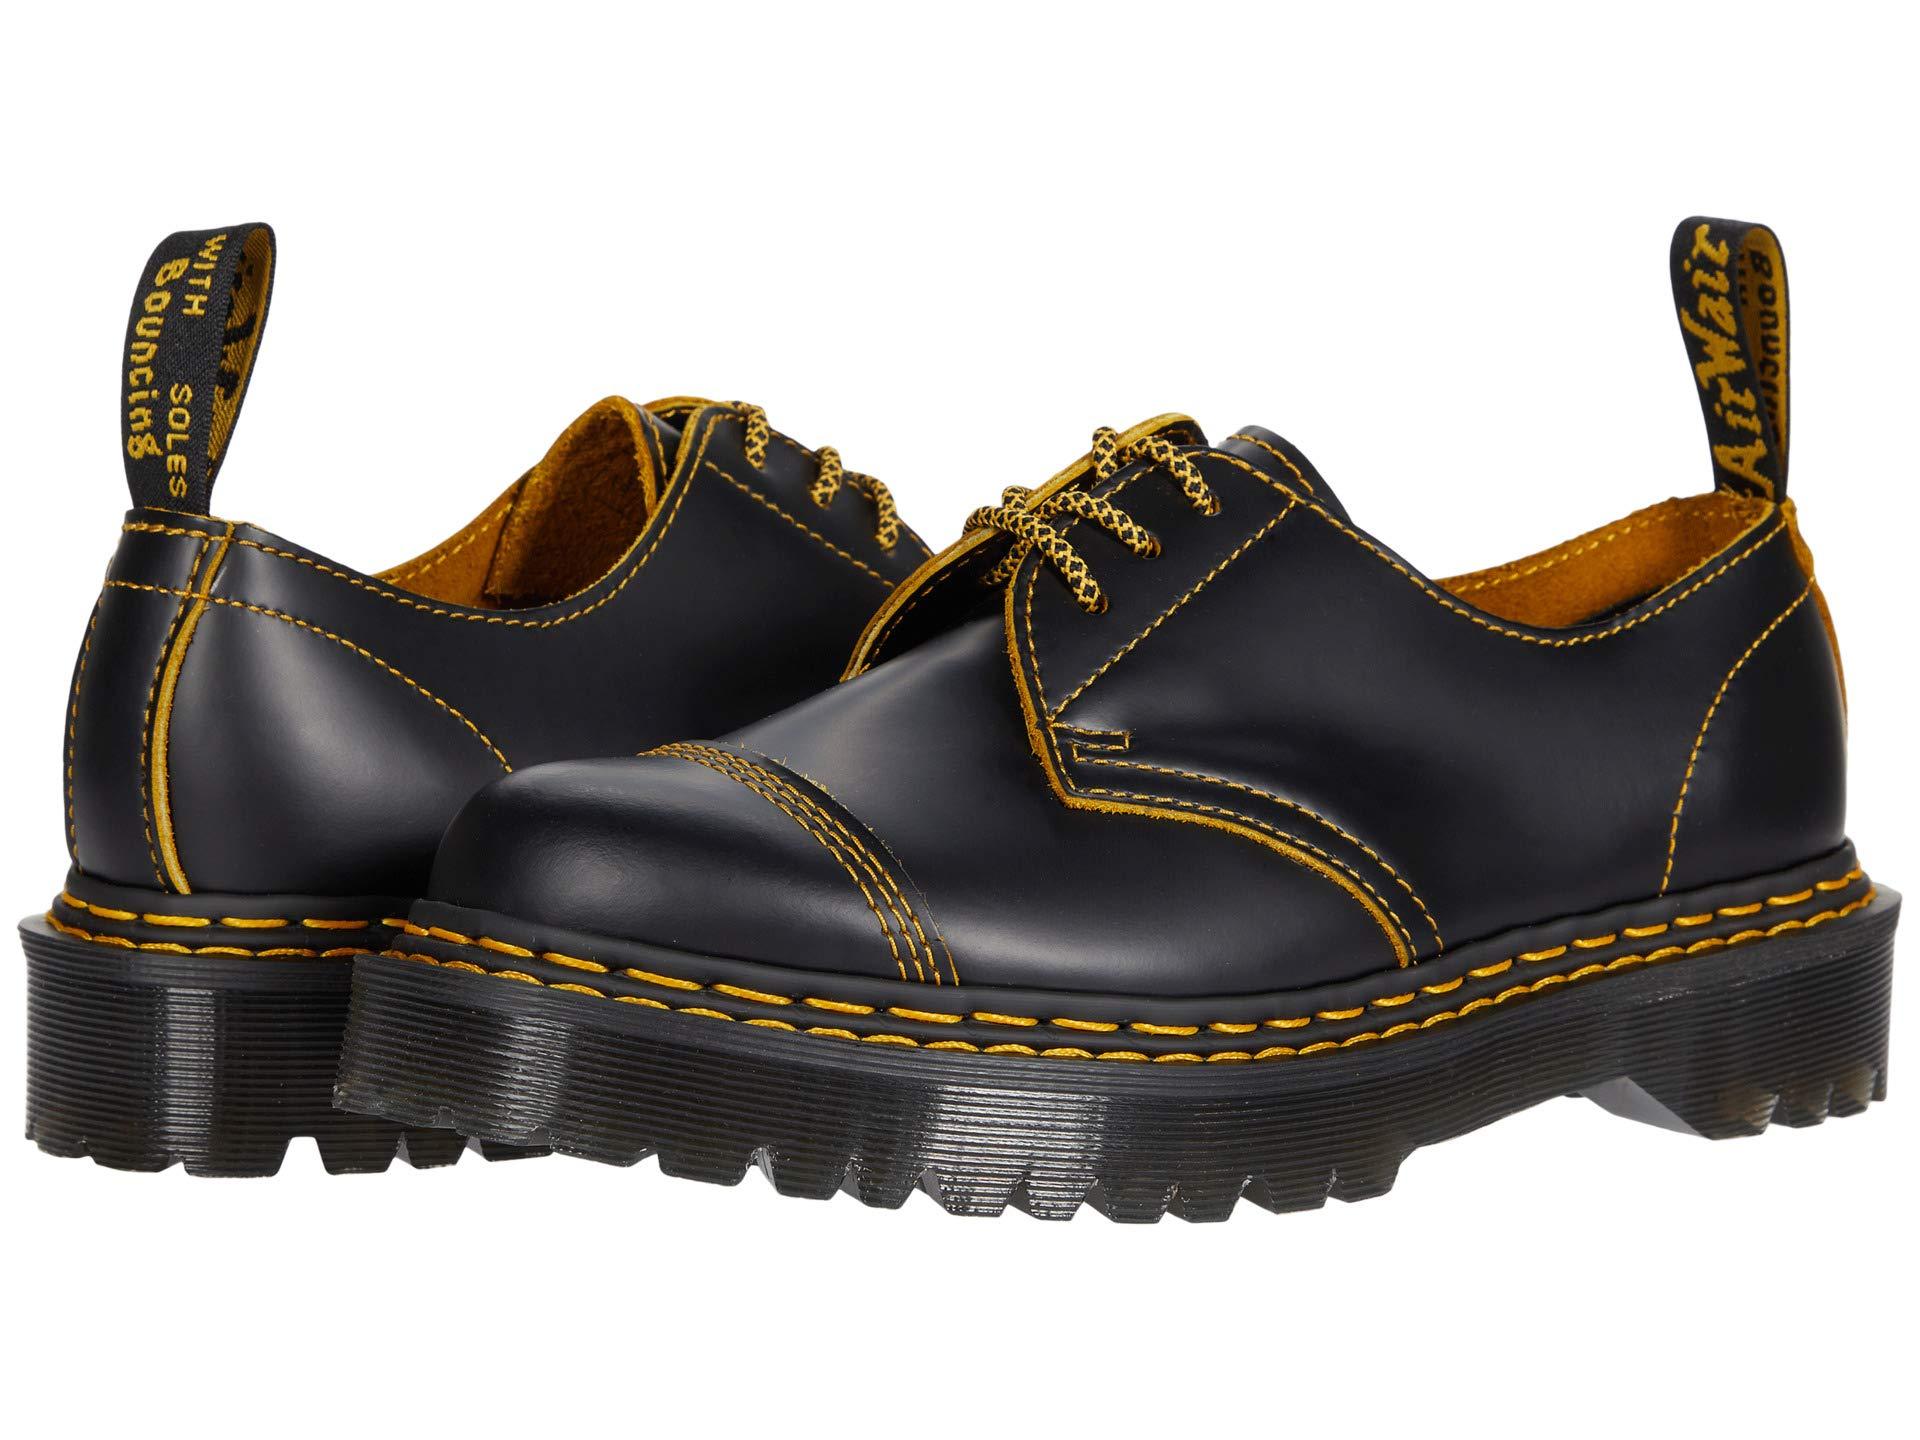 Dr. Martens 1461 Bex Double Stitch in Black | Lyst